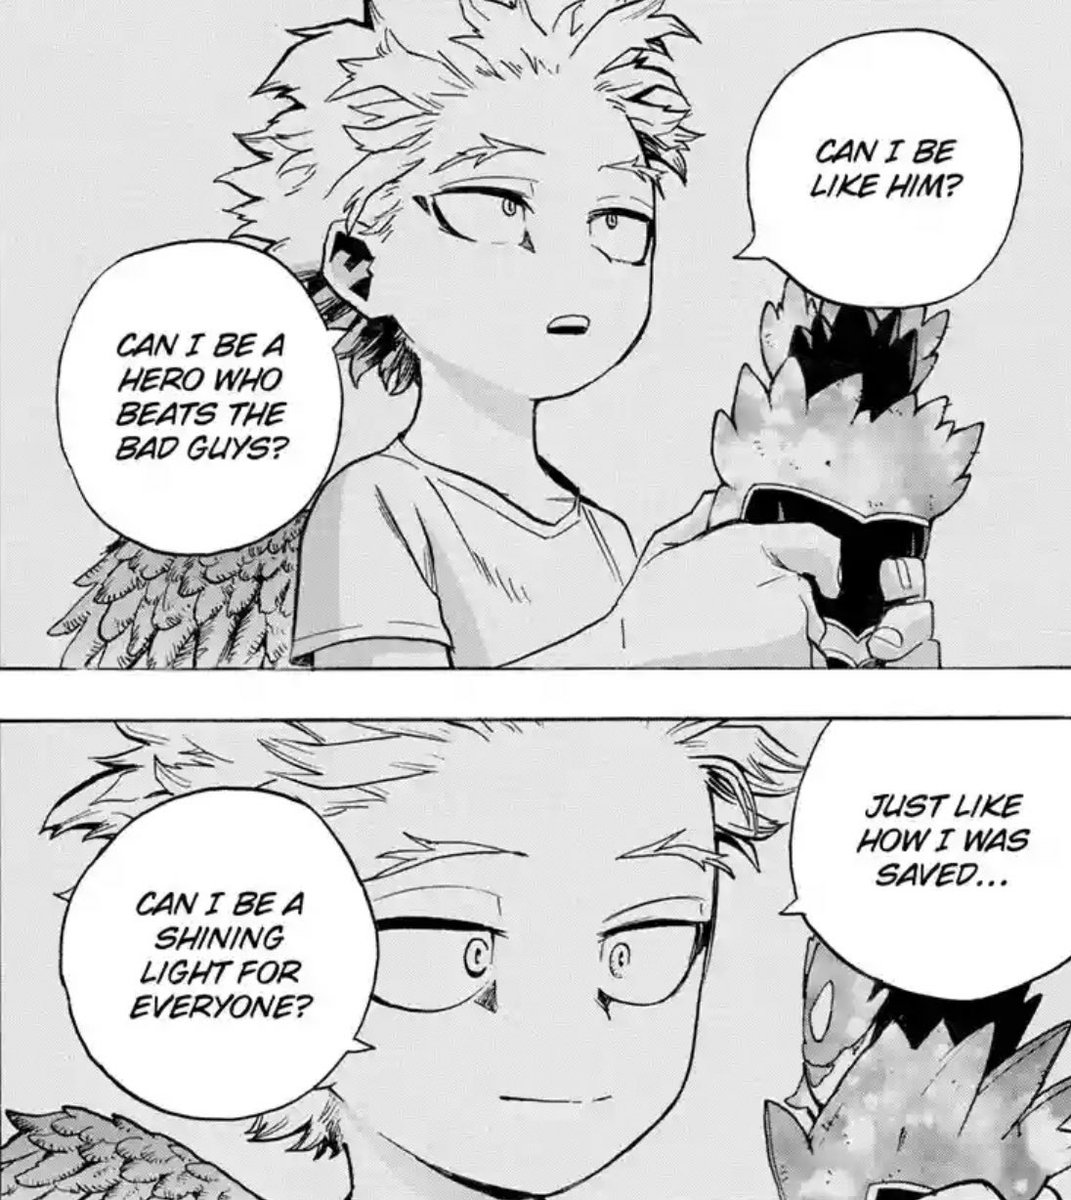 dabi and hawks are foils: a thread- touya had a big family while keigo didn't even had anyone to give permission for his trainings- touya was indirectly k!lled by endeavor, keigo was indirectly saved by endeavor